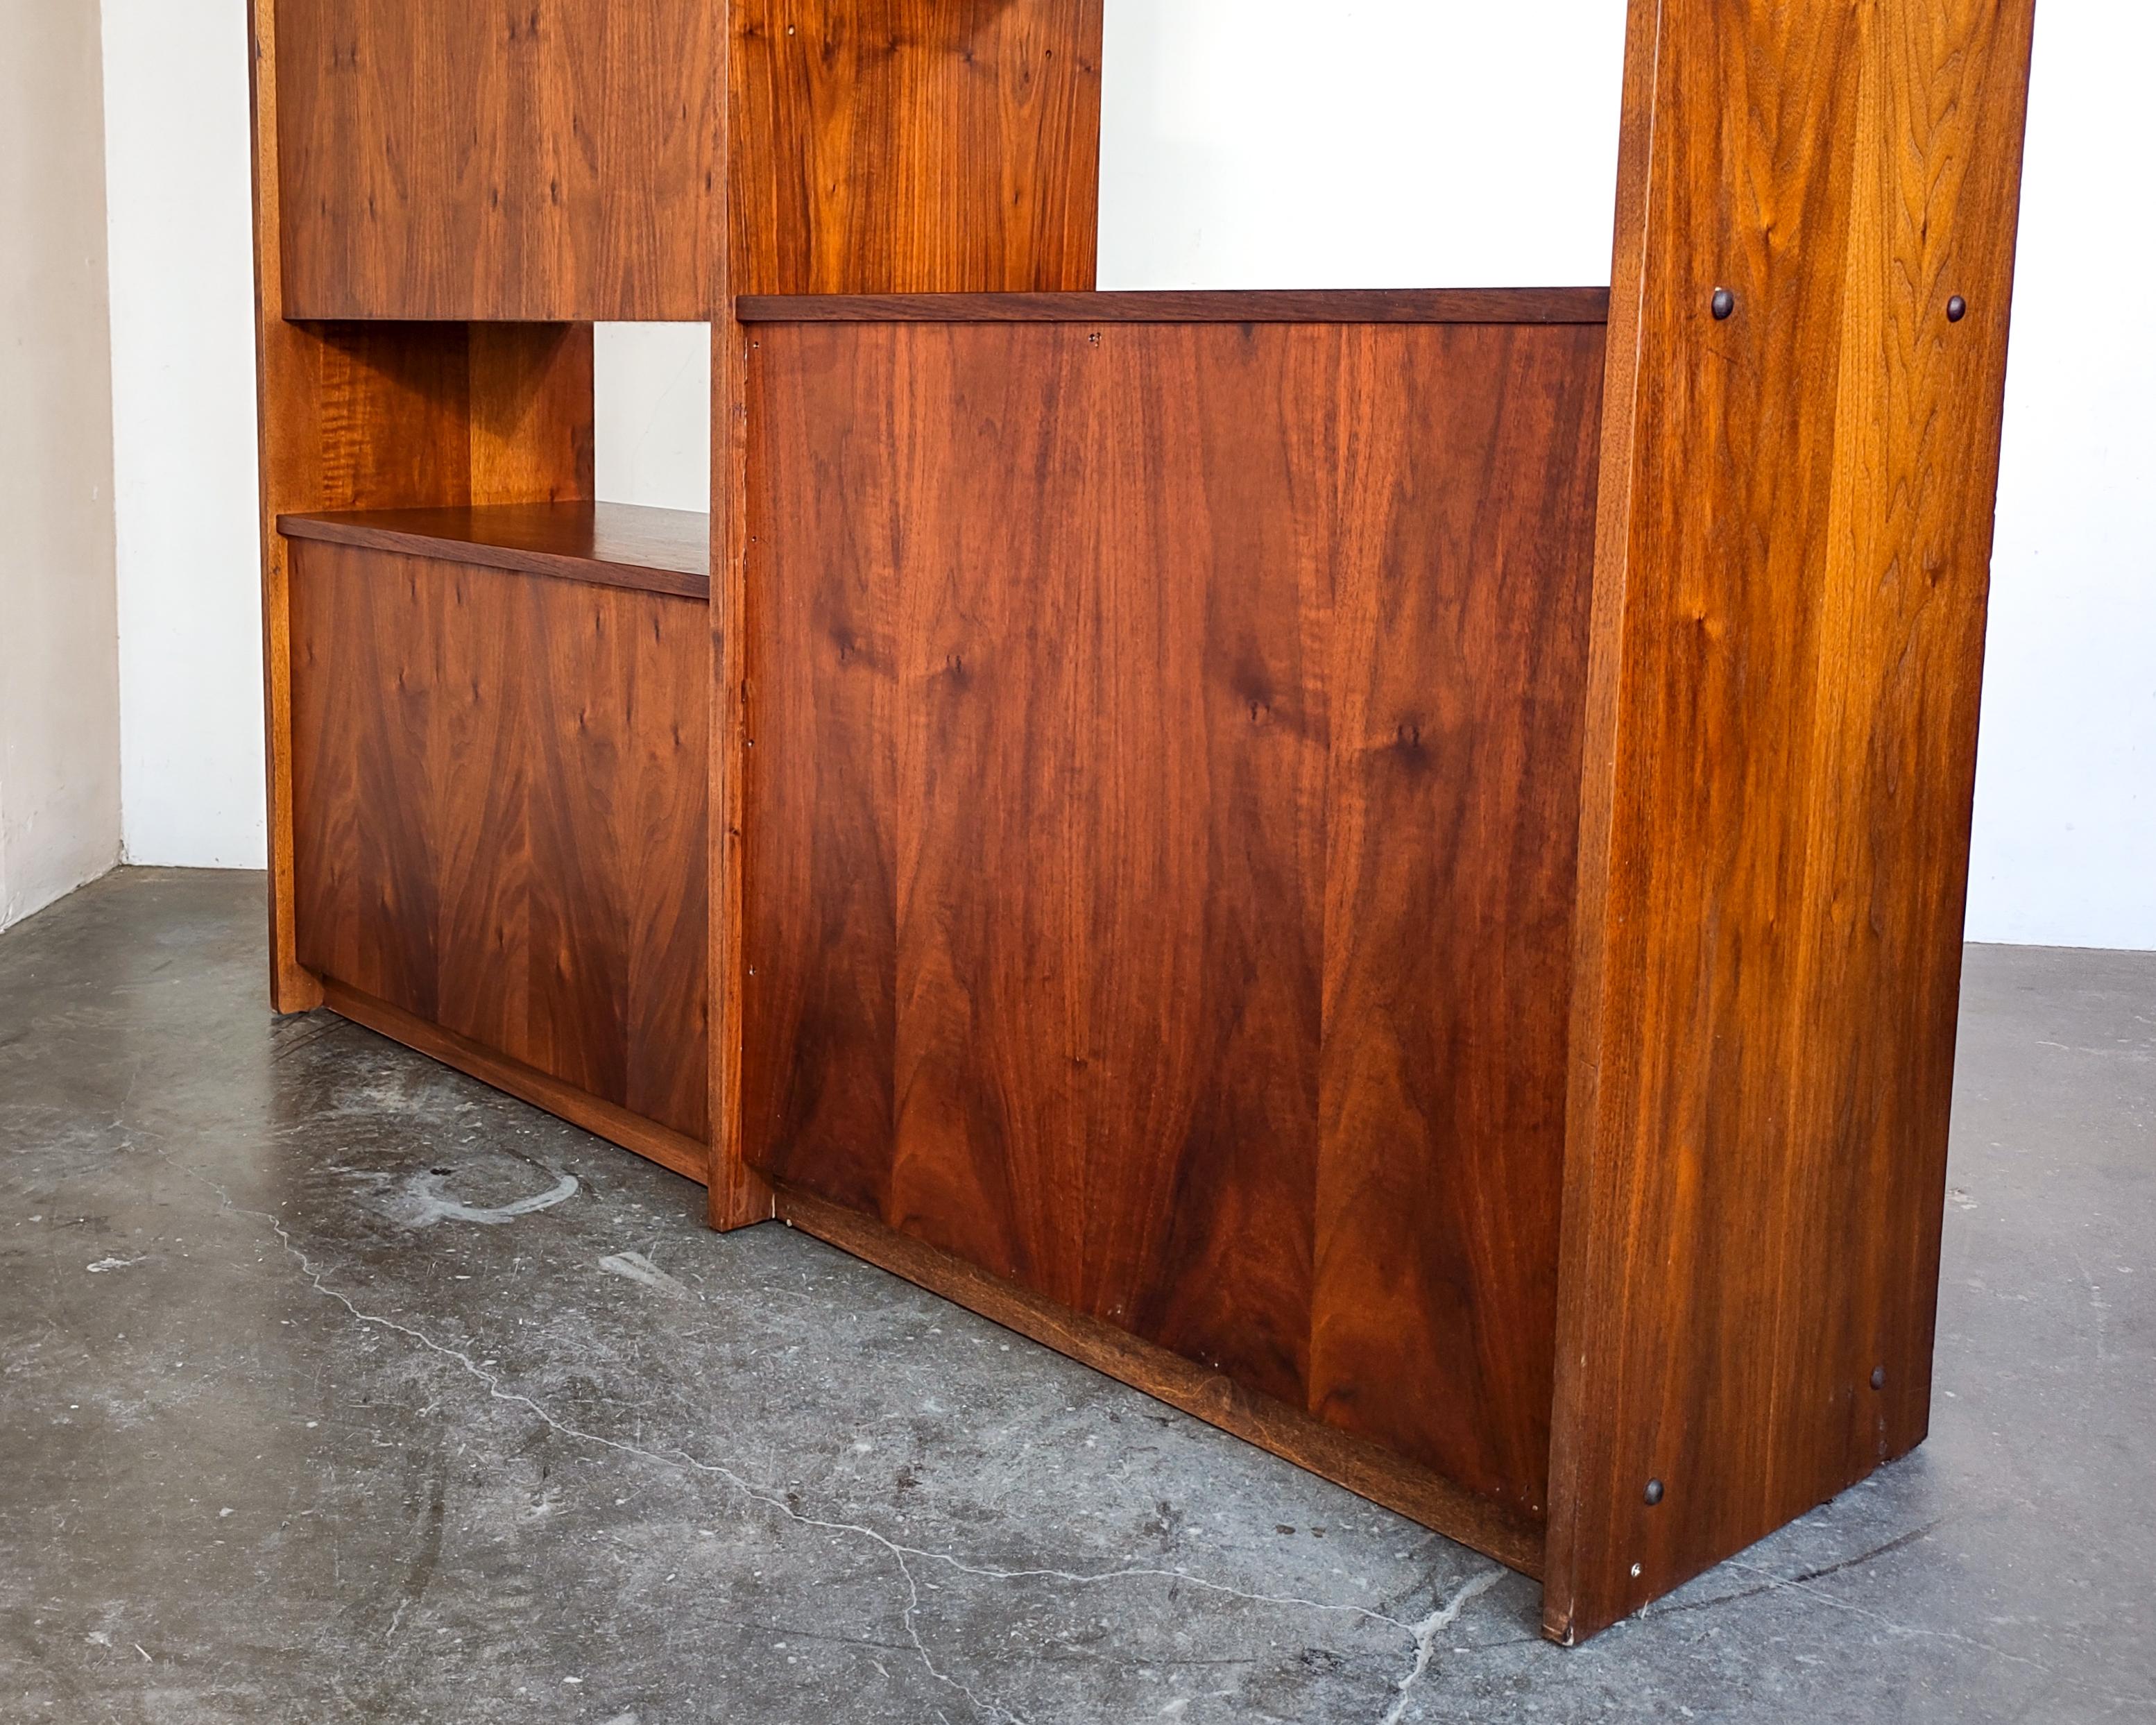 1960s Mid-Century Modern Walnut Room Divider / Wall Unit with Drop-Down Desk 8